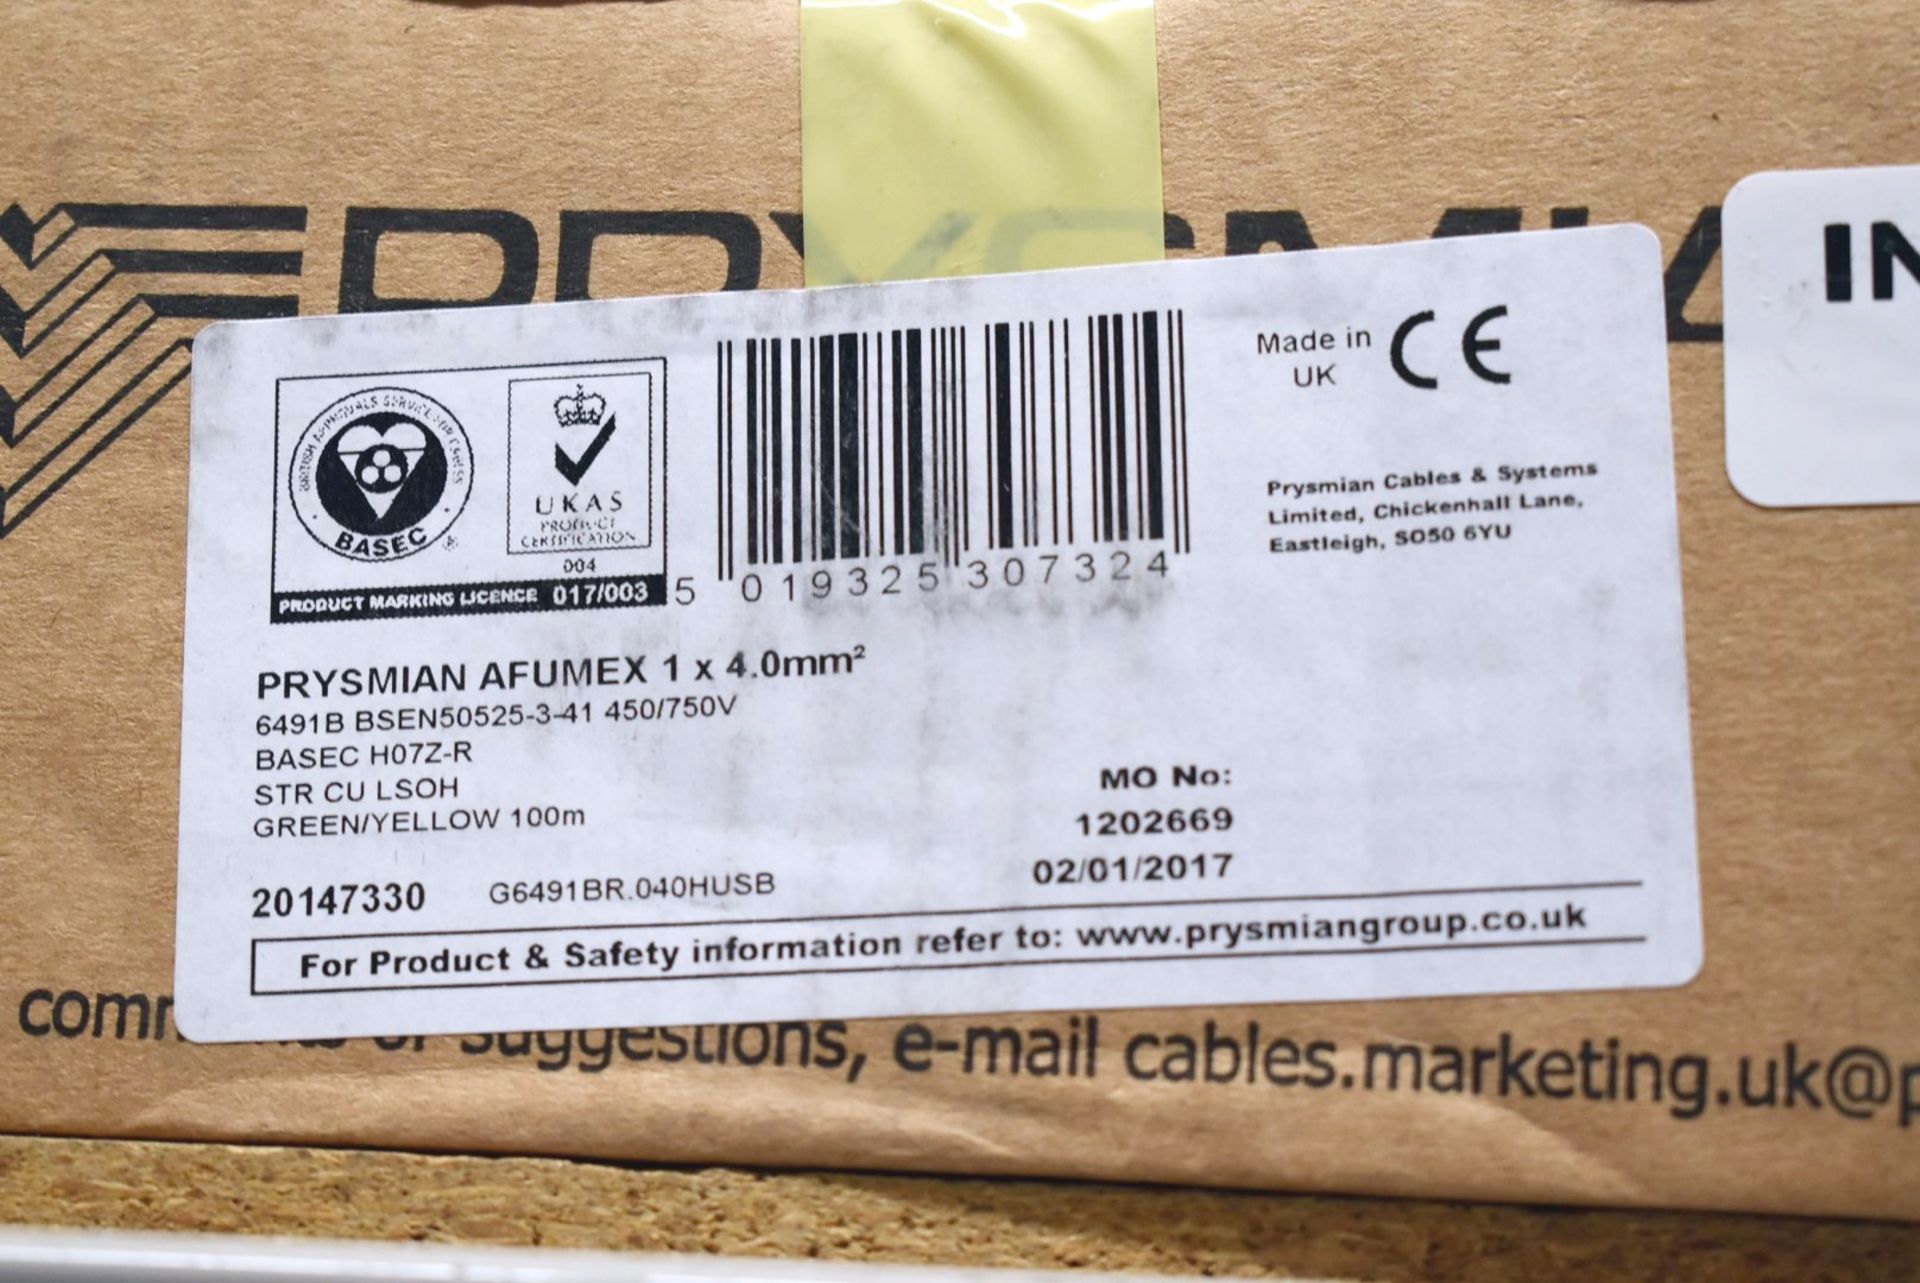 2 x Reels of Prysmian Afumex 4mm 100m Green/Yellow H07Z-R 6491B Cable - Unused Boxed Stock - Image 2 of 2